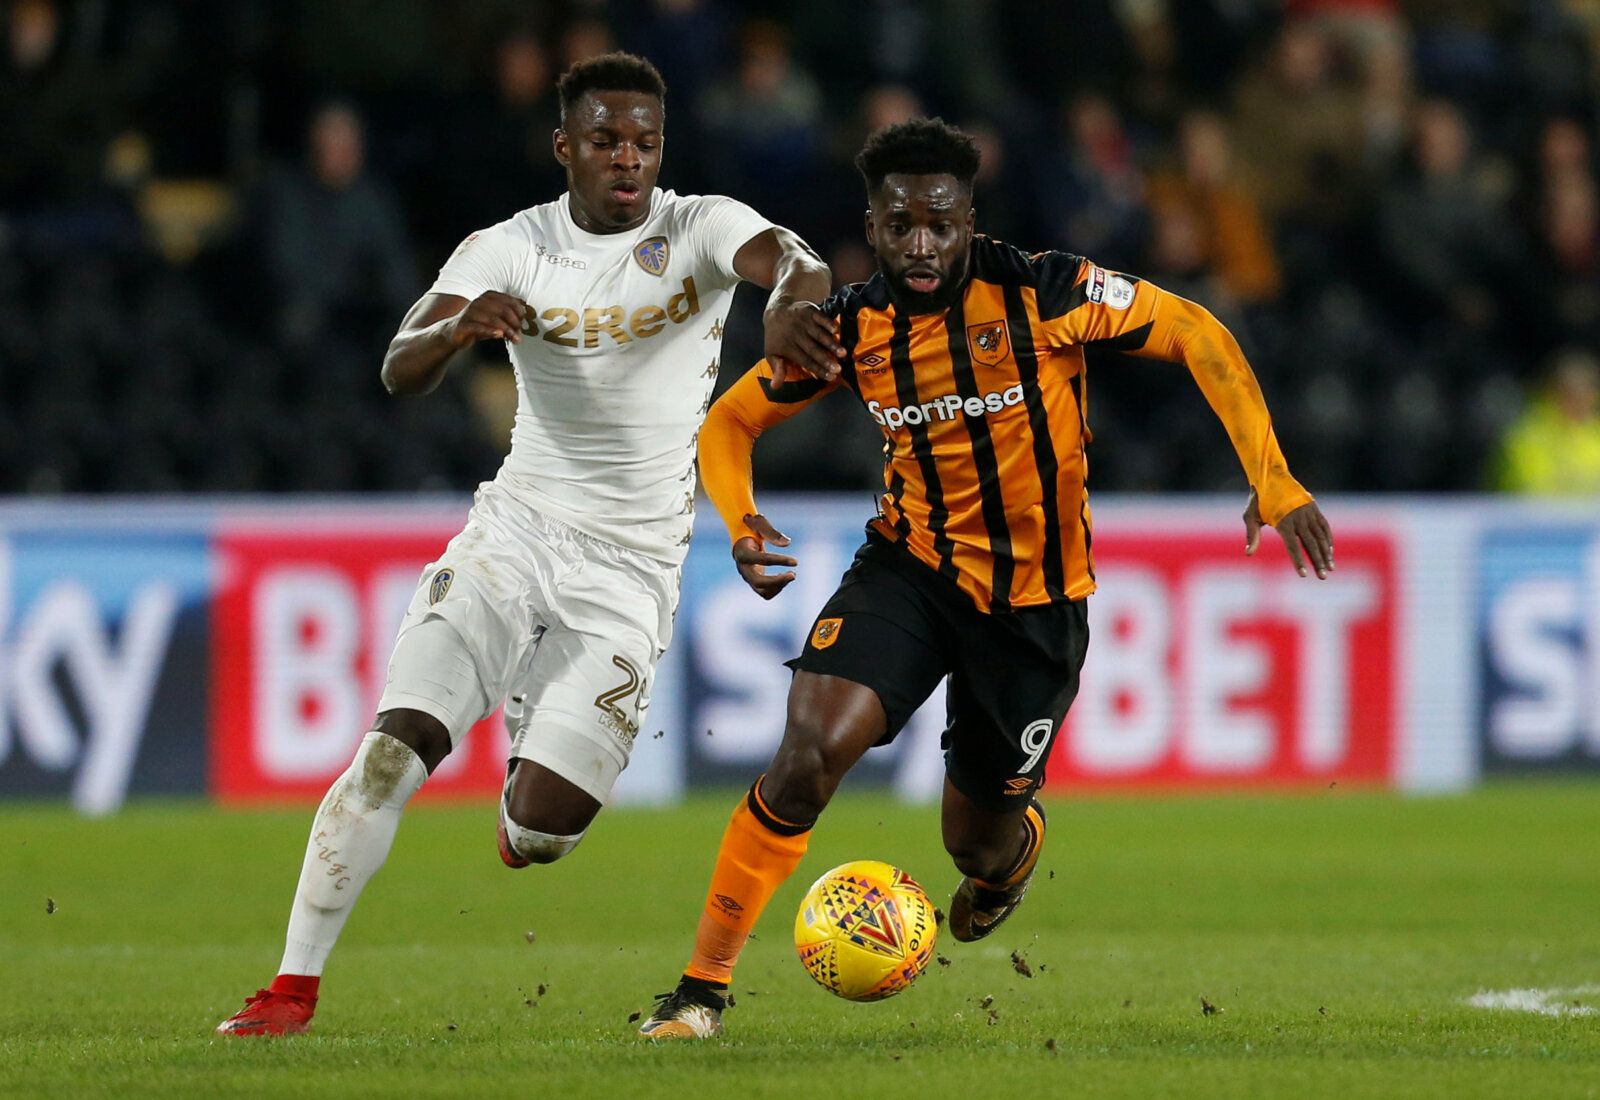 Soccer Football - Championship - Hull City vs Leeds United - KCOM Stadium, Hull, Britain - January 30, 2018   Leeds United's Ronaldo Vieira and Hull City's Nouha Dicko in action   Action Images/Ed Sykes    EDITORIAL USE ONLY. No use with unauthorized audio, video, data, fixture lists, club/league logos or 